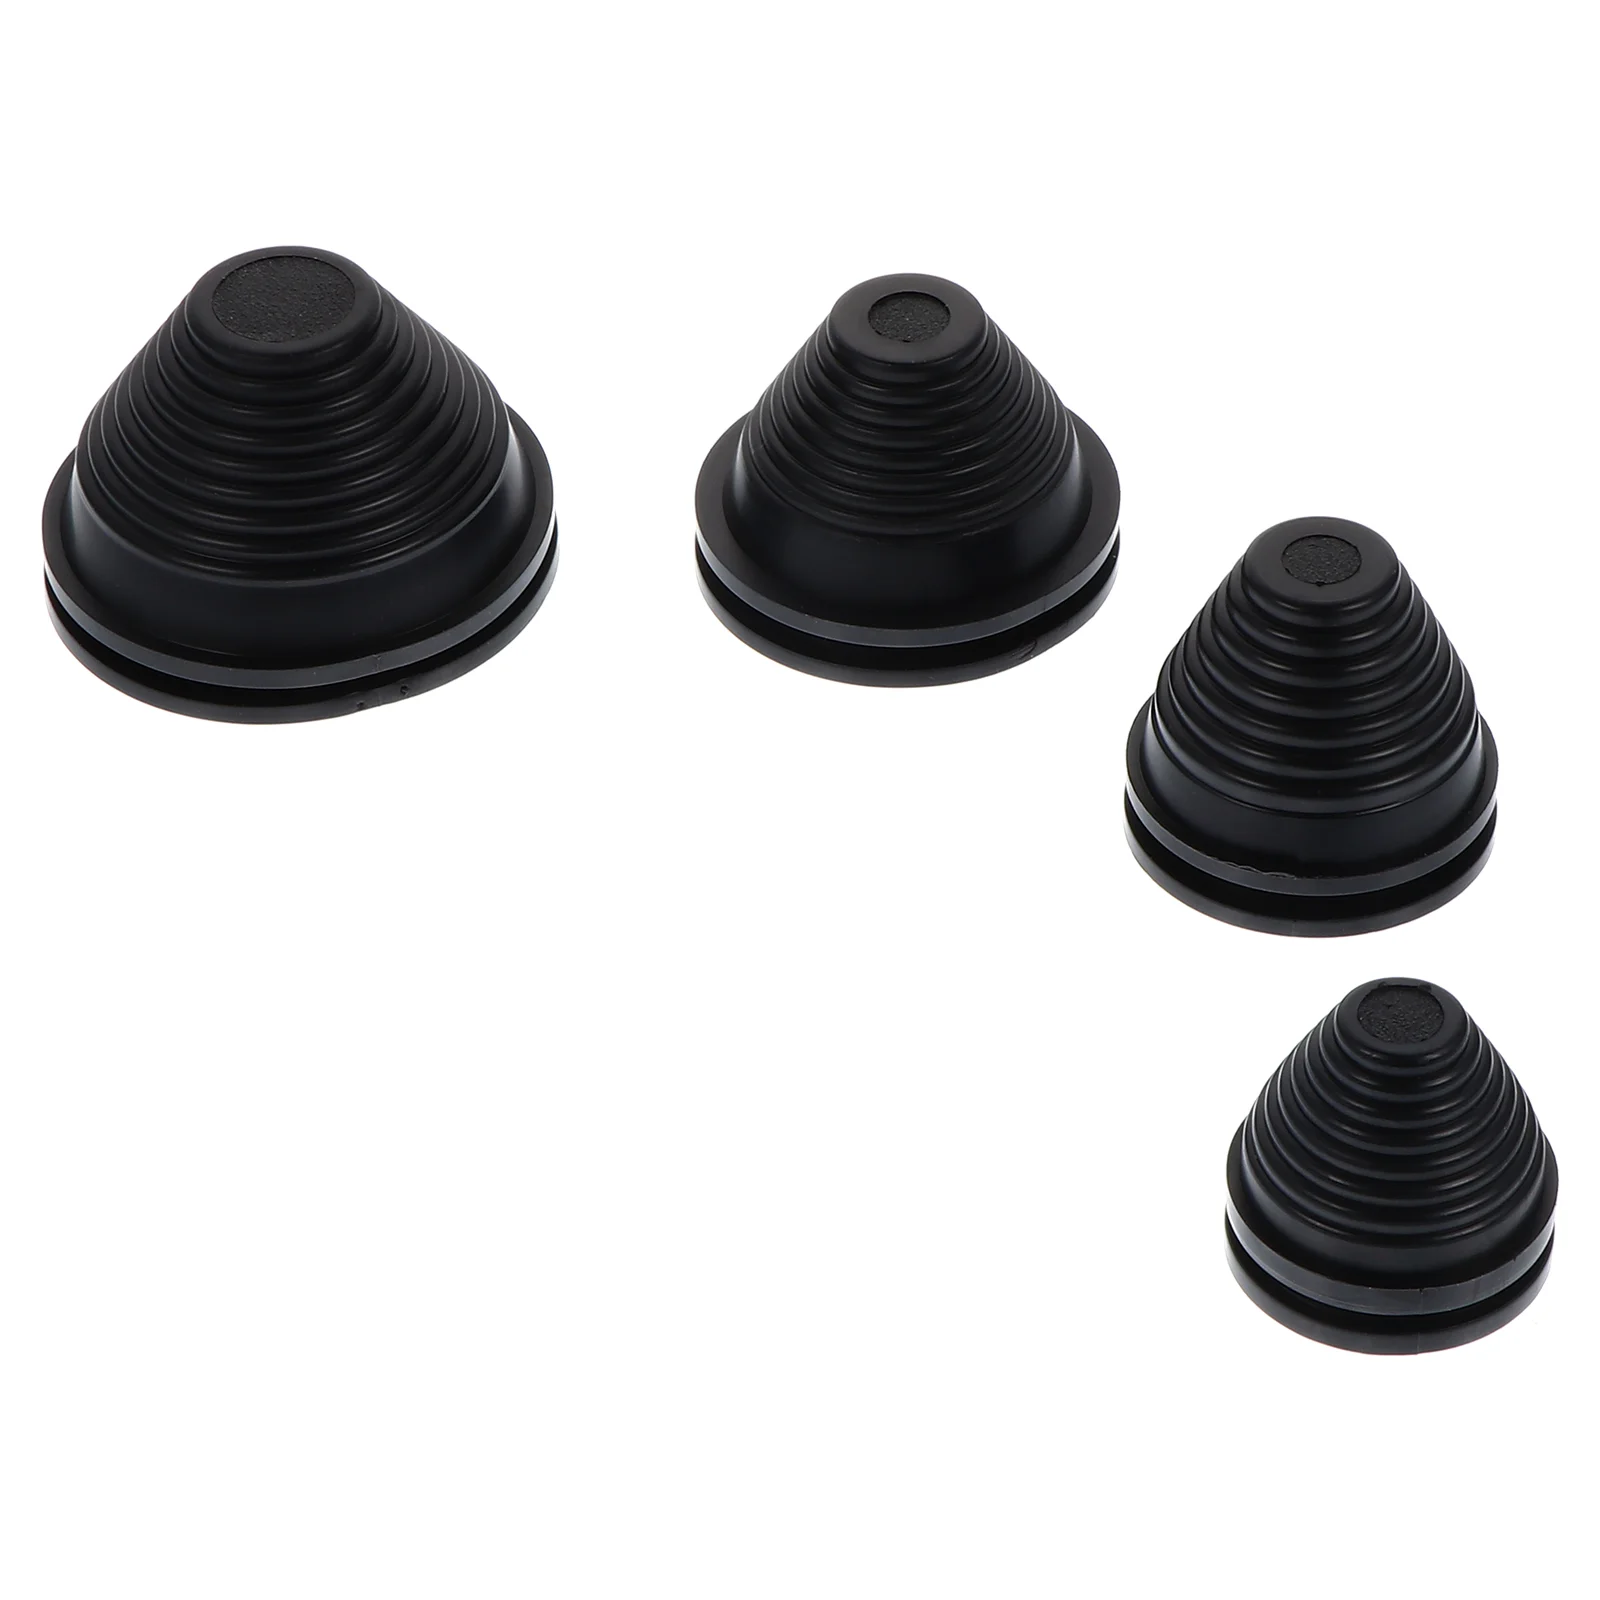 

Rubber Gasket Plug Wire Grommets Hole Ring Eyelet Protection Firewall Grommet Set Synthetic Tower Shaped Assortment Kit